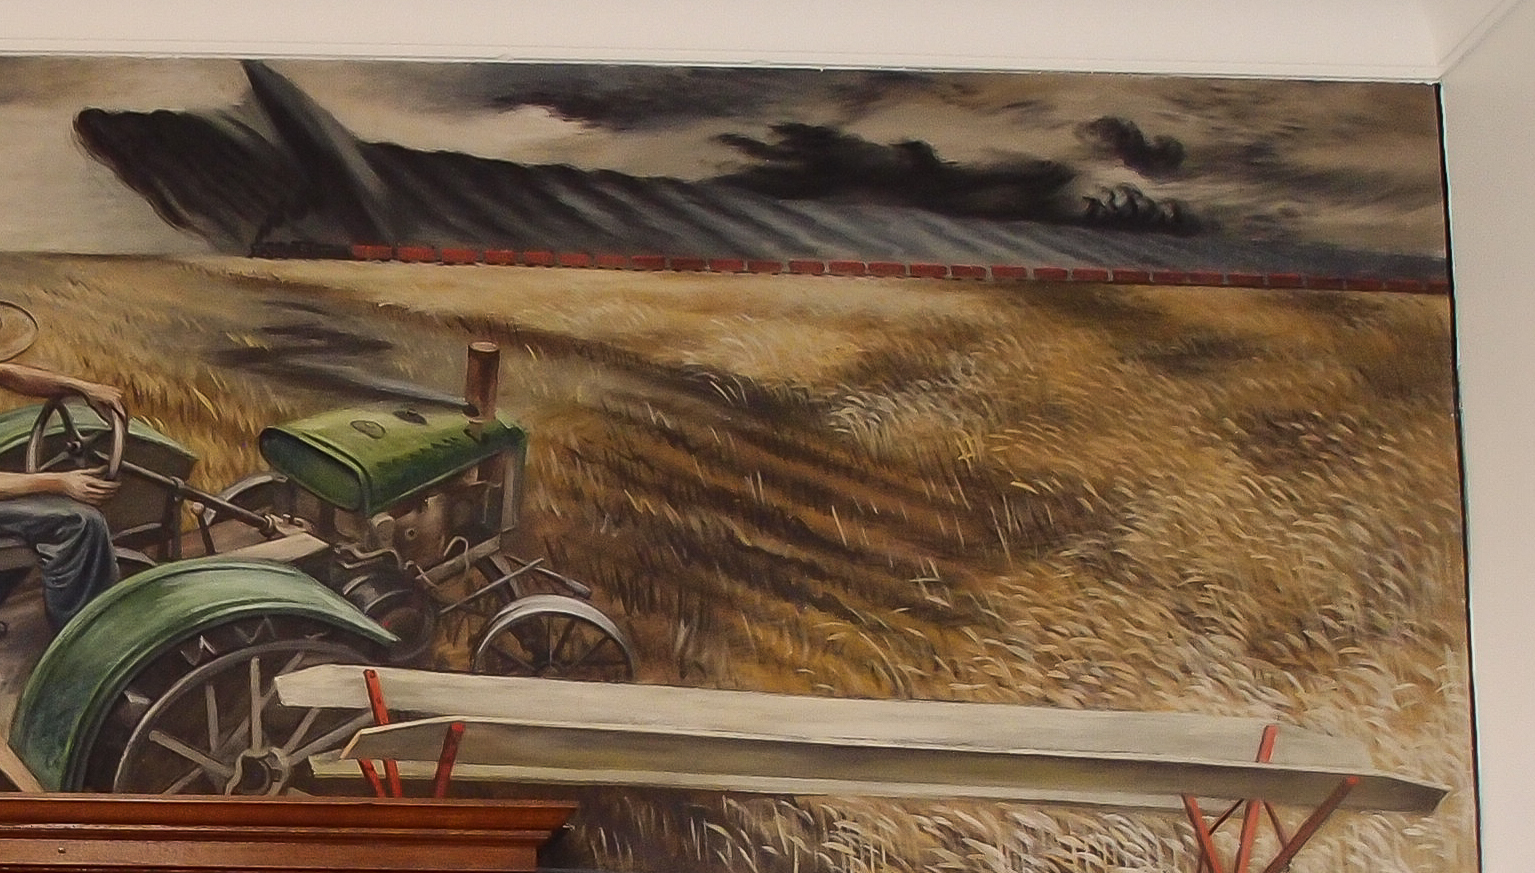 Detail of the mural in fig. 1, showing the green tractor to the left and the approaching clouds to the right.